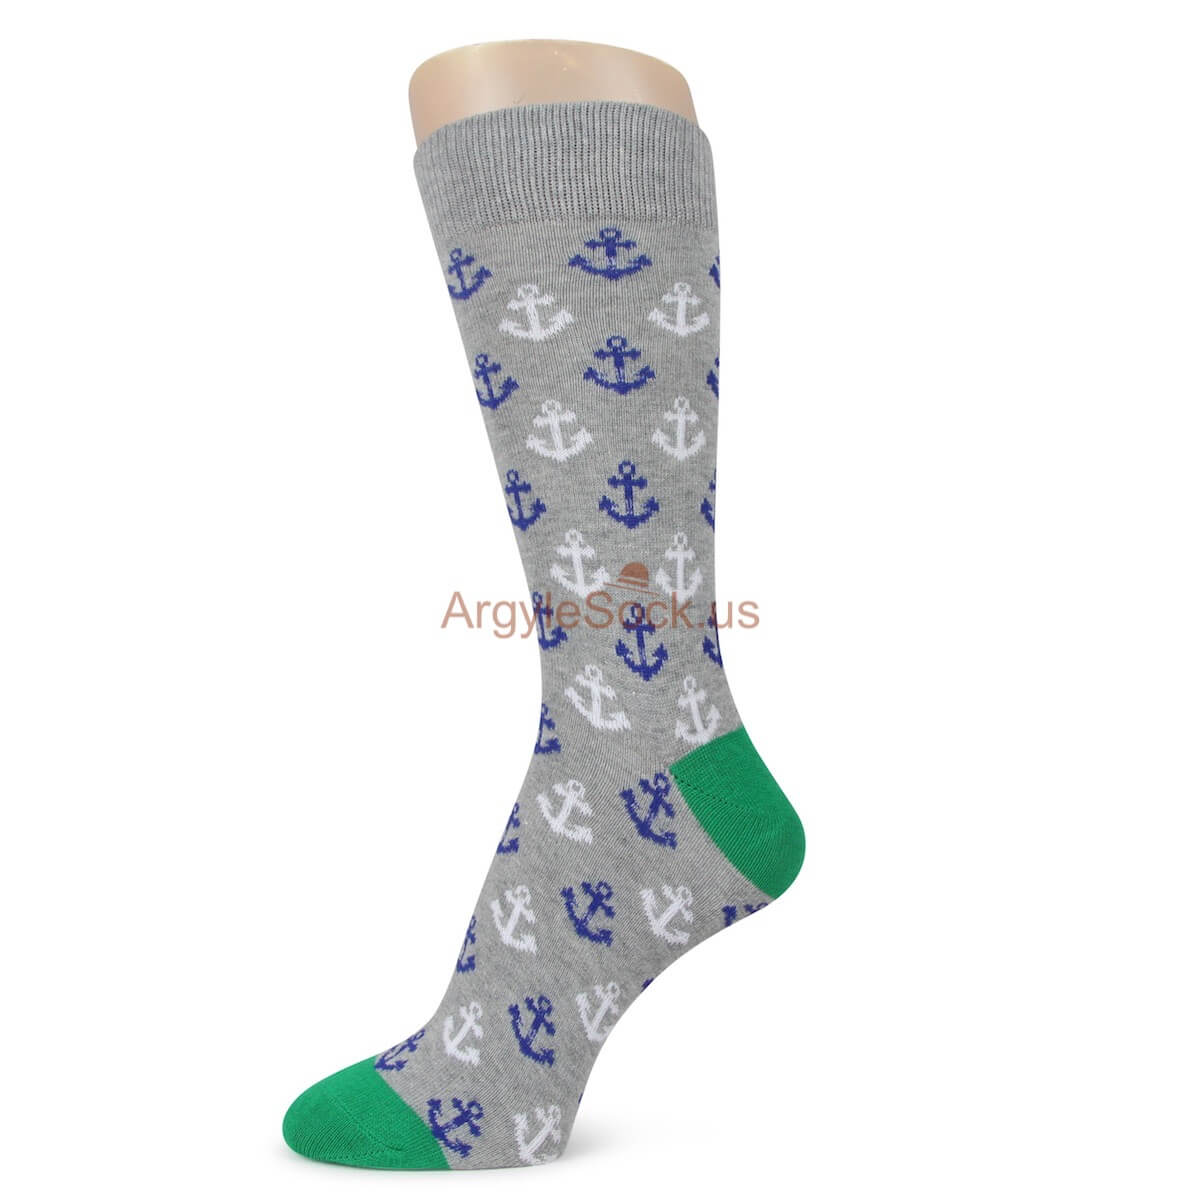 Grey with Anchor Styled Socks for Men